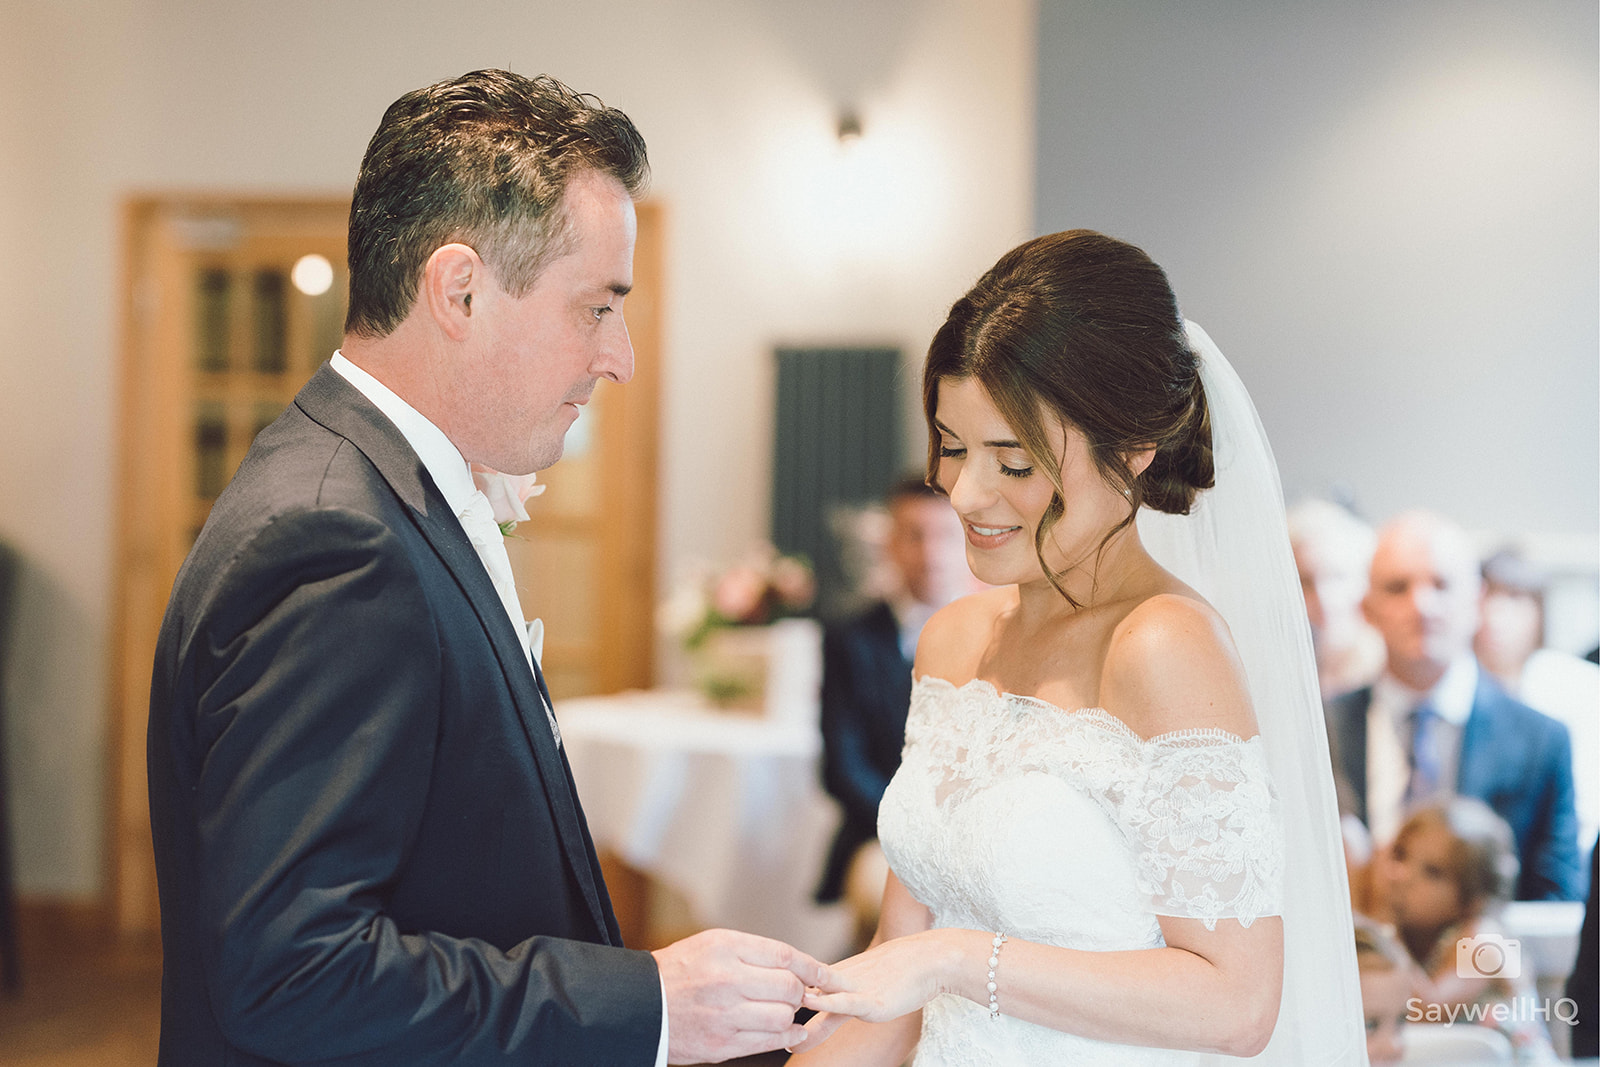 The Chequers Inn Wedding Photography - bride and groom, exchanging wedding rings during the wedding ceremony